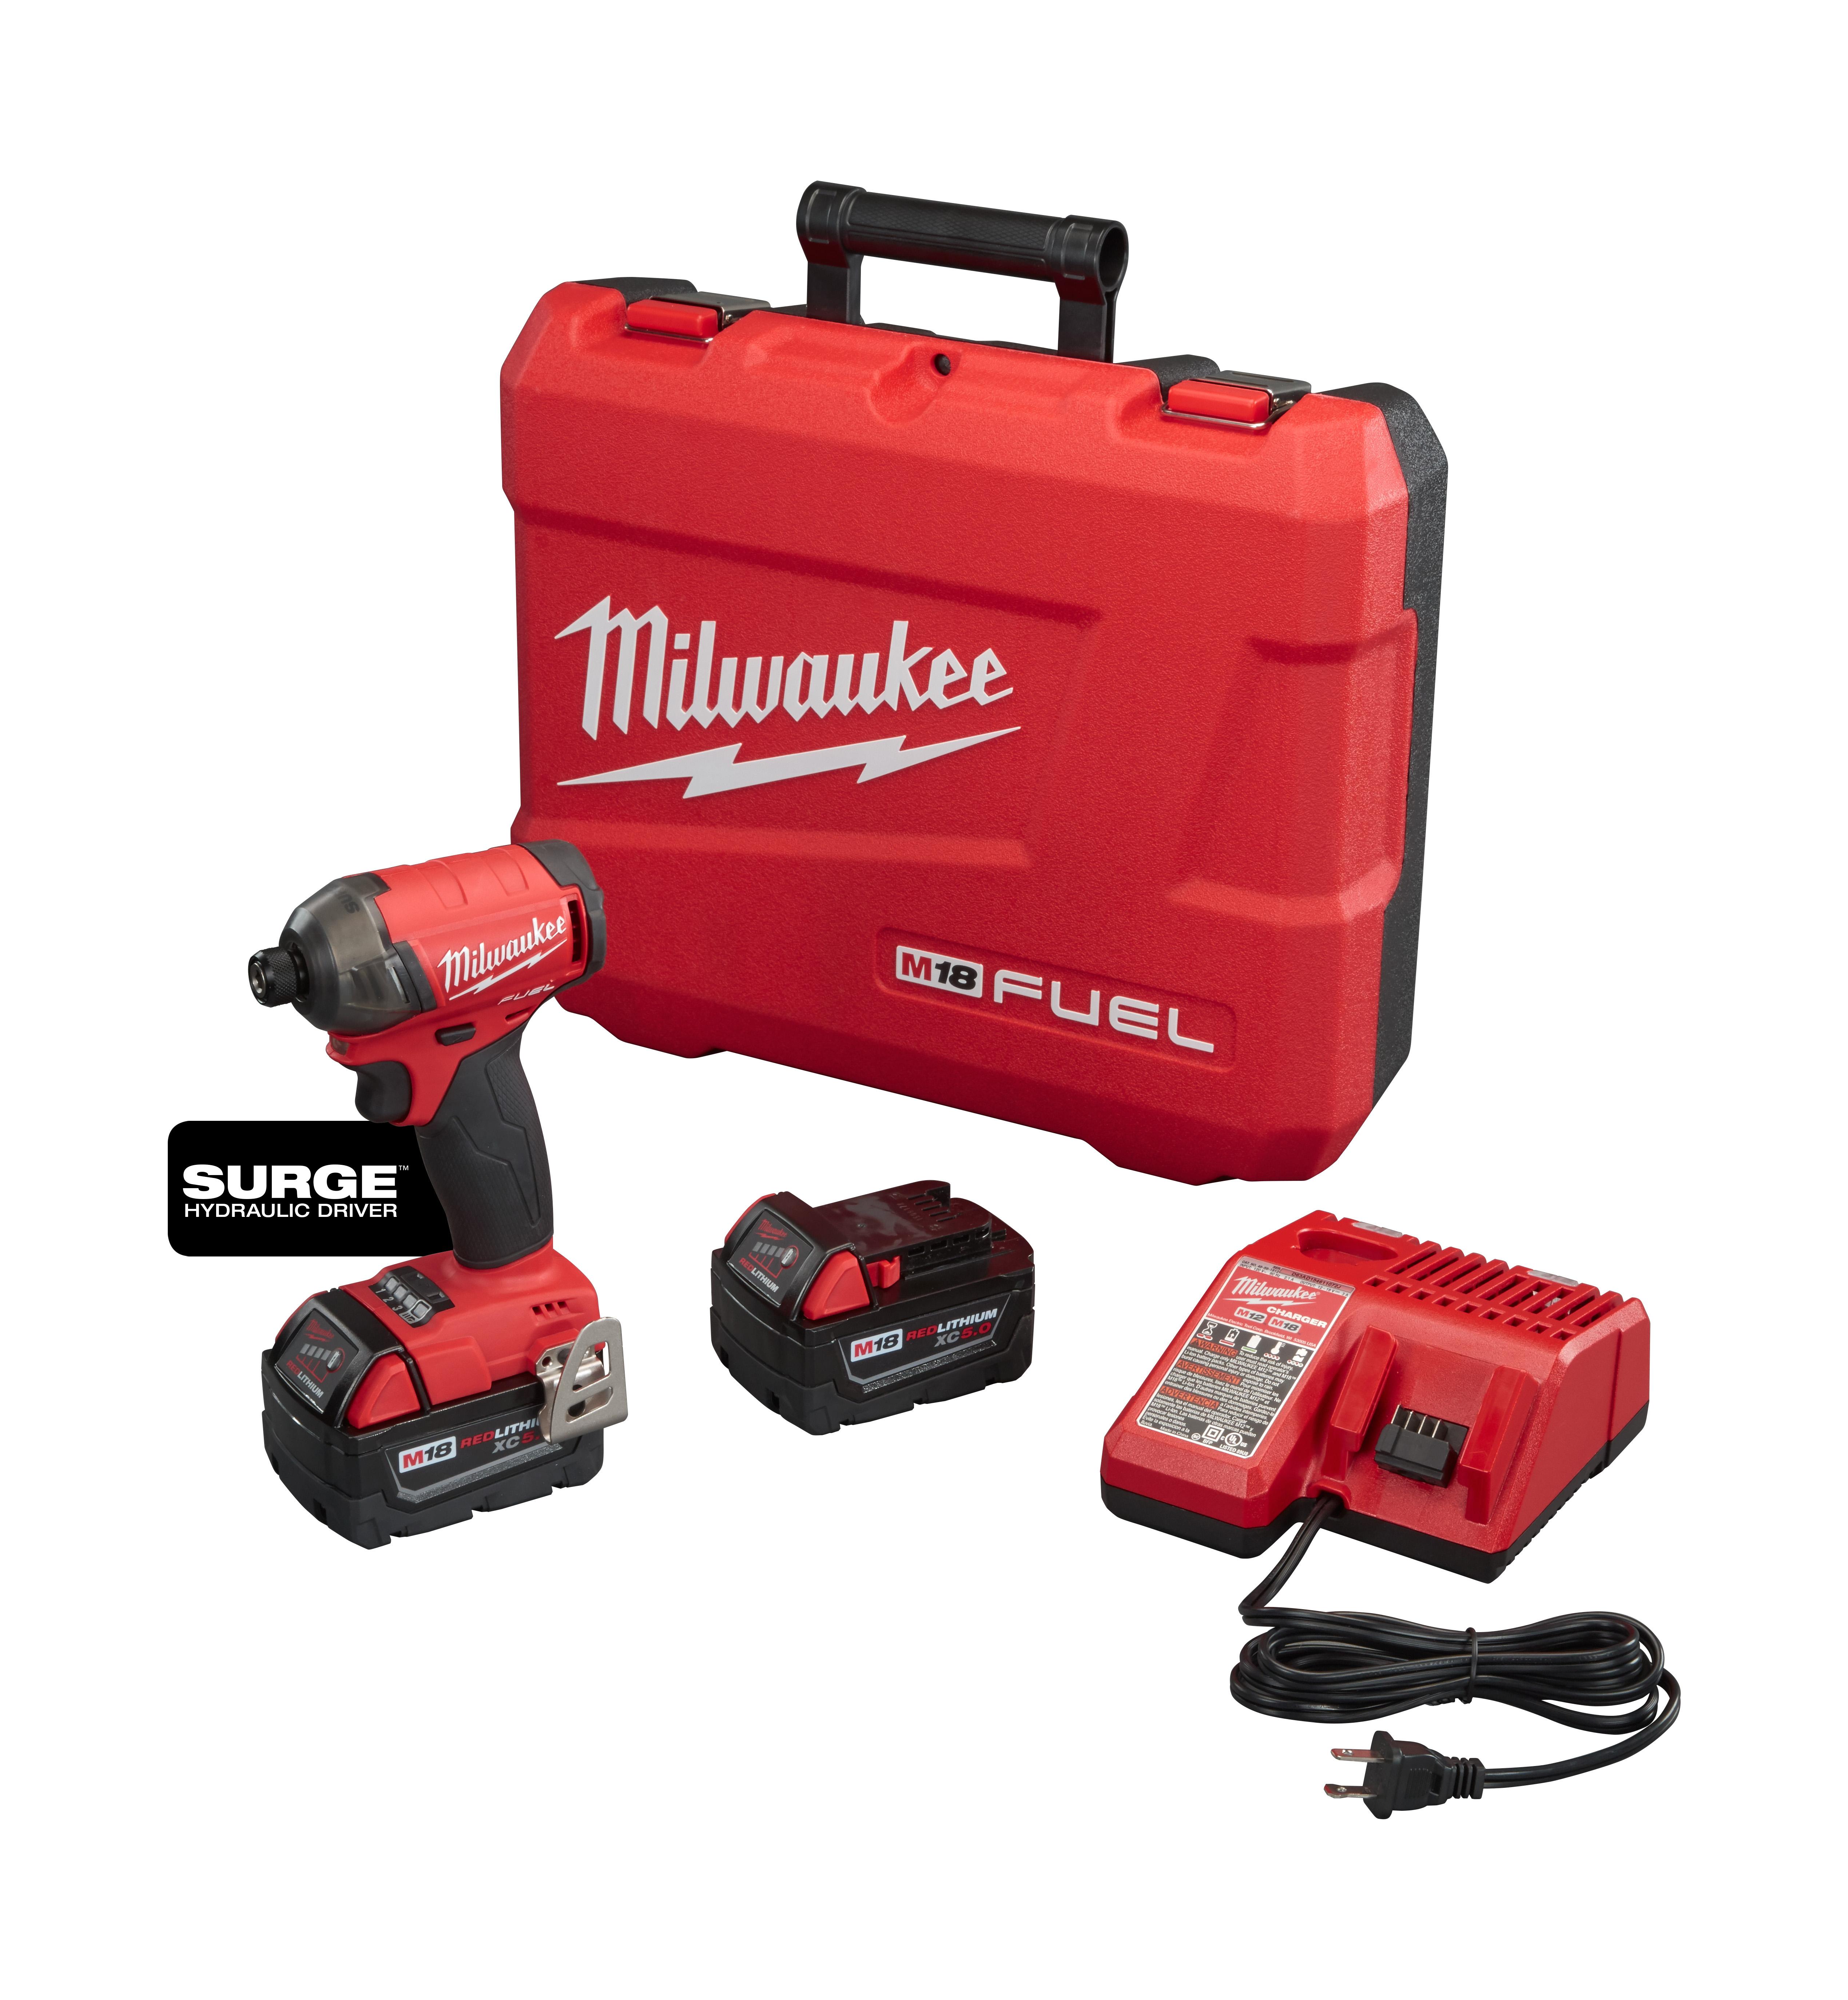 Milwaukee® M18™ FUEL™ 2760-20 Cordless Impact Driver, 1/4 in Hex/Straight Drive, 4000 bpm, 450 in-lb Torque, 18 VDC, 5 in OAL